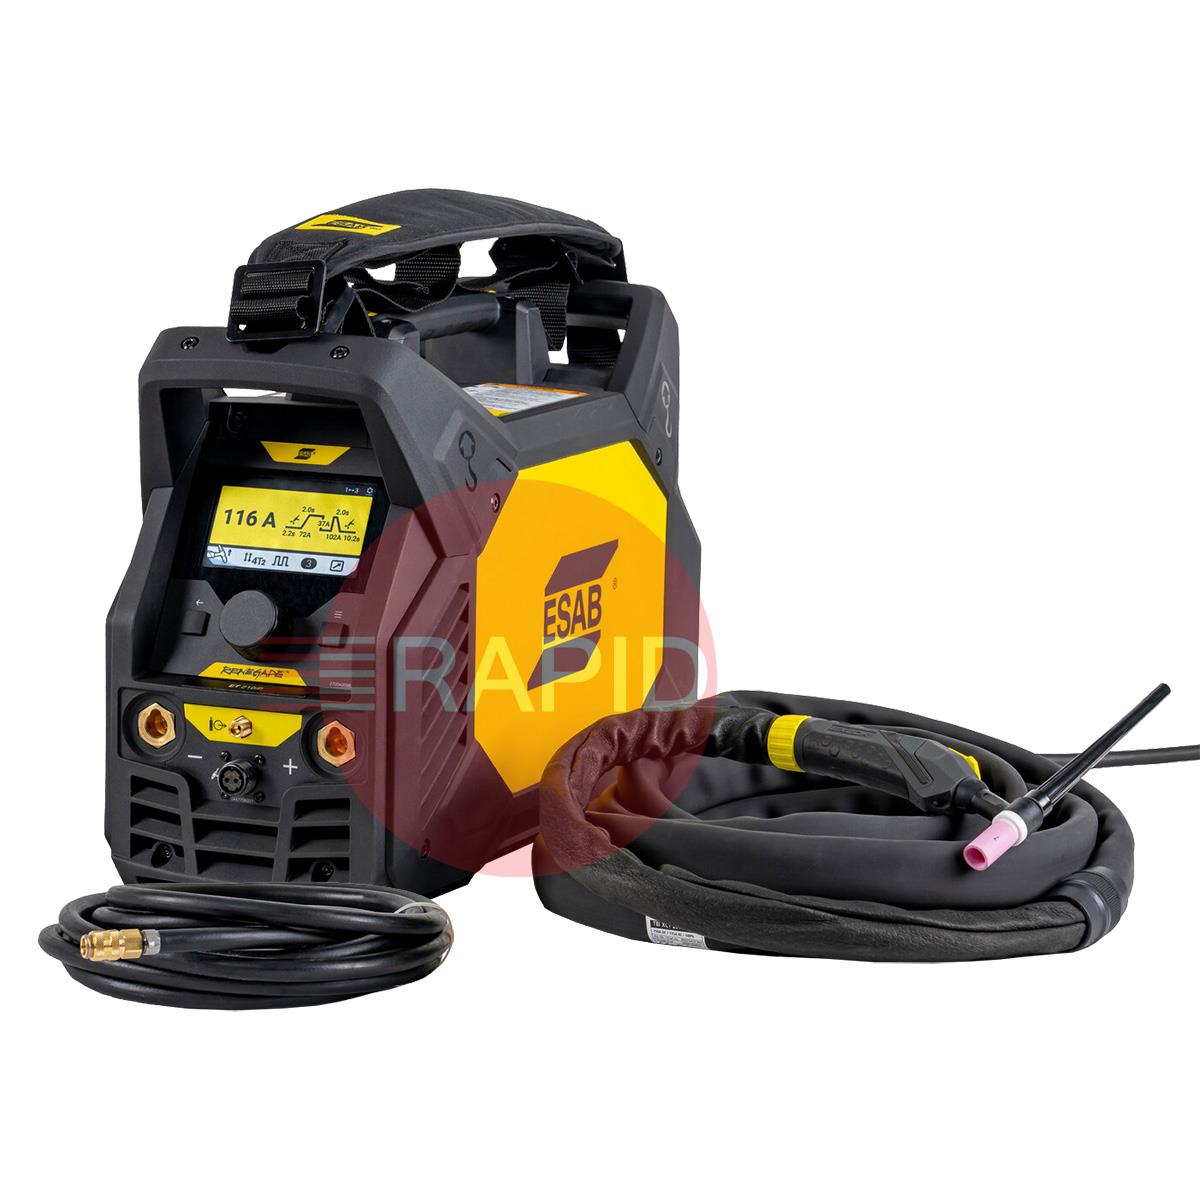 0447750890  ESAB Renegade ET 210iP DC Advanced Ready to Weld Air-Cooled Package with 4m TIG Torch - 115 / 230v, 1ph